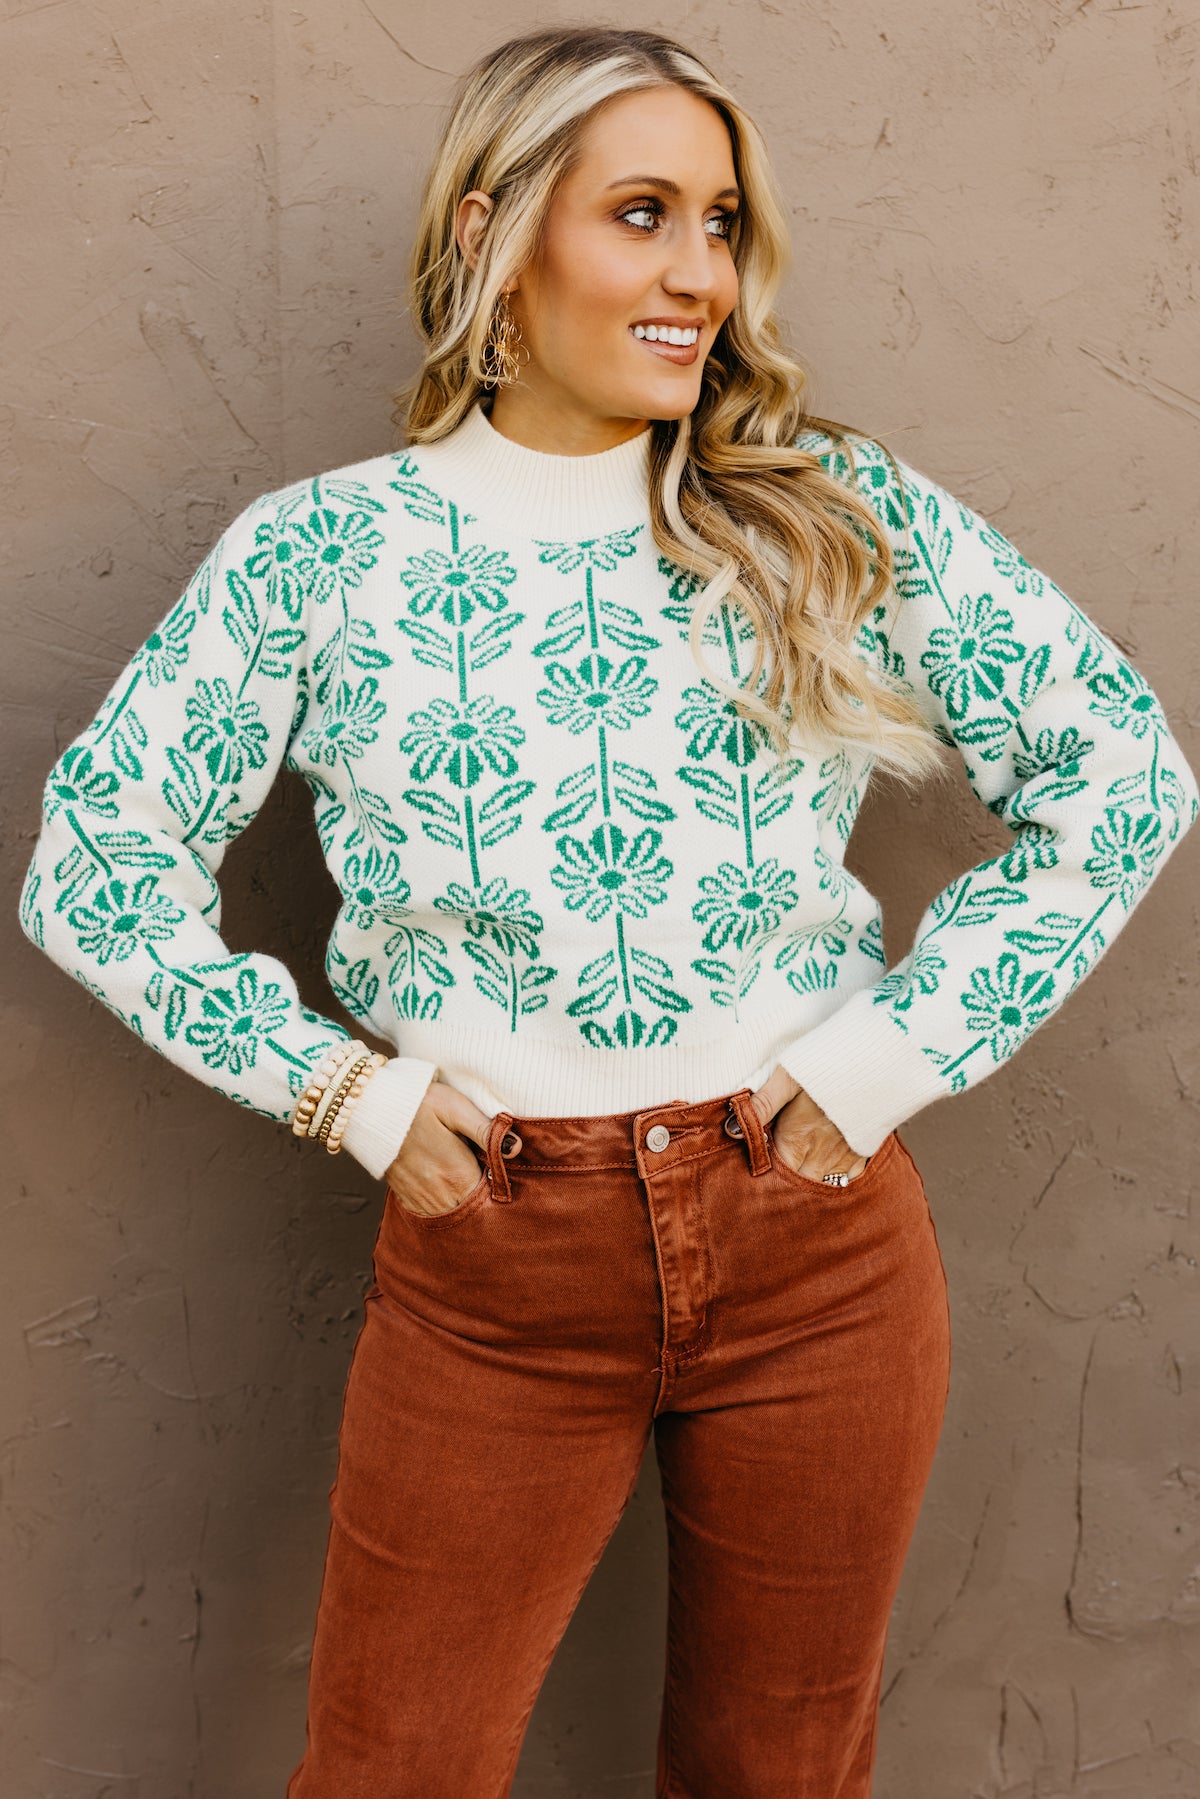 The Callan Floral Pattern Sweater